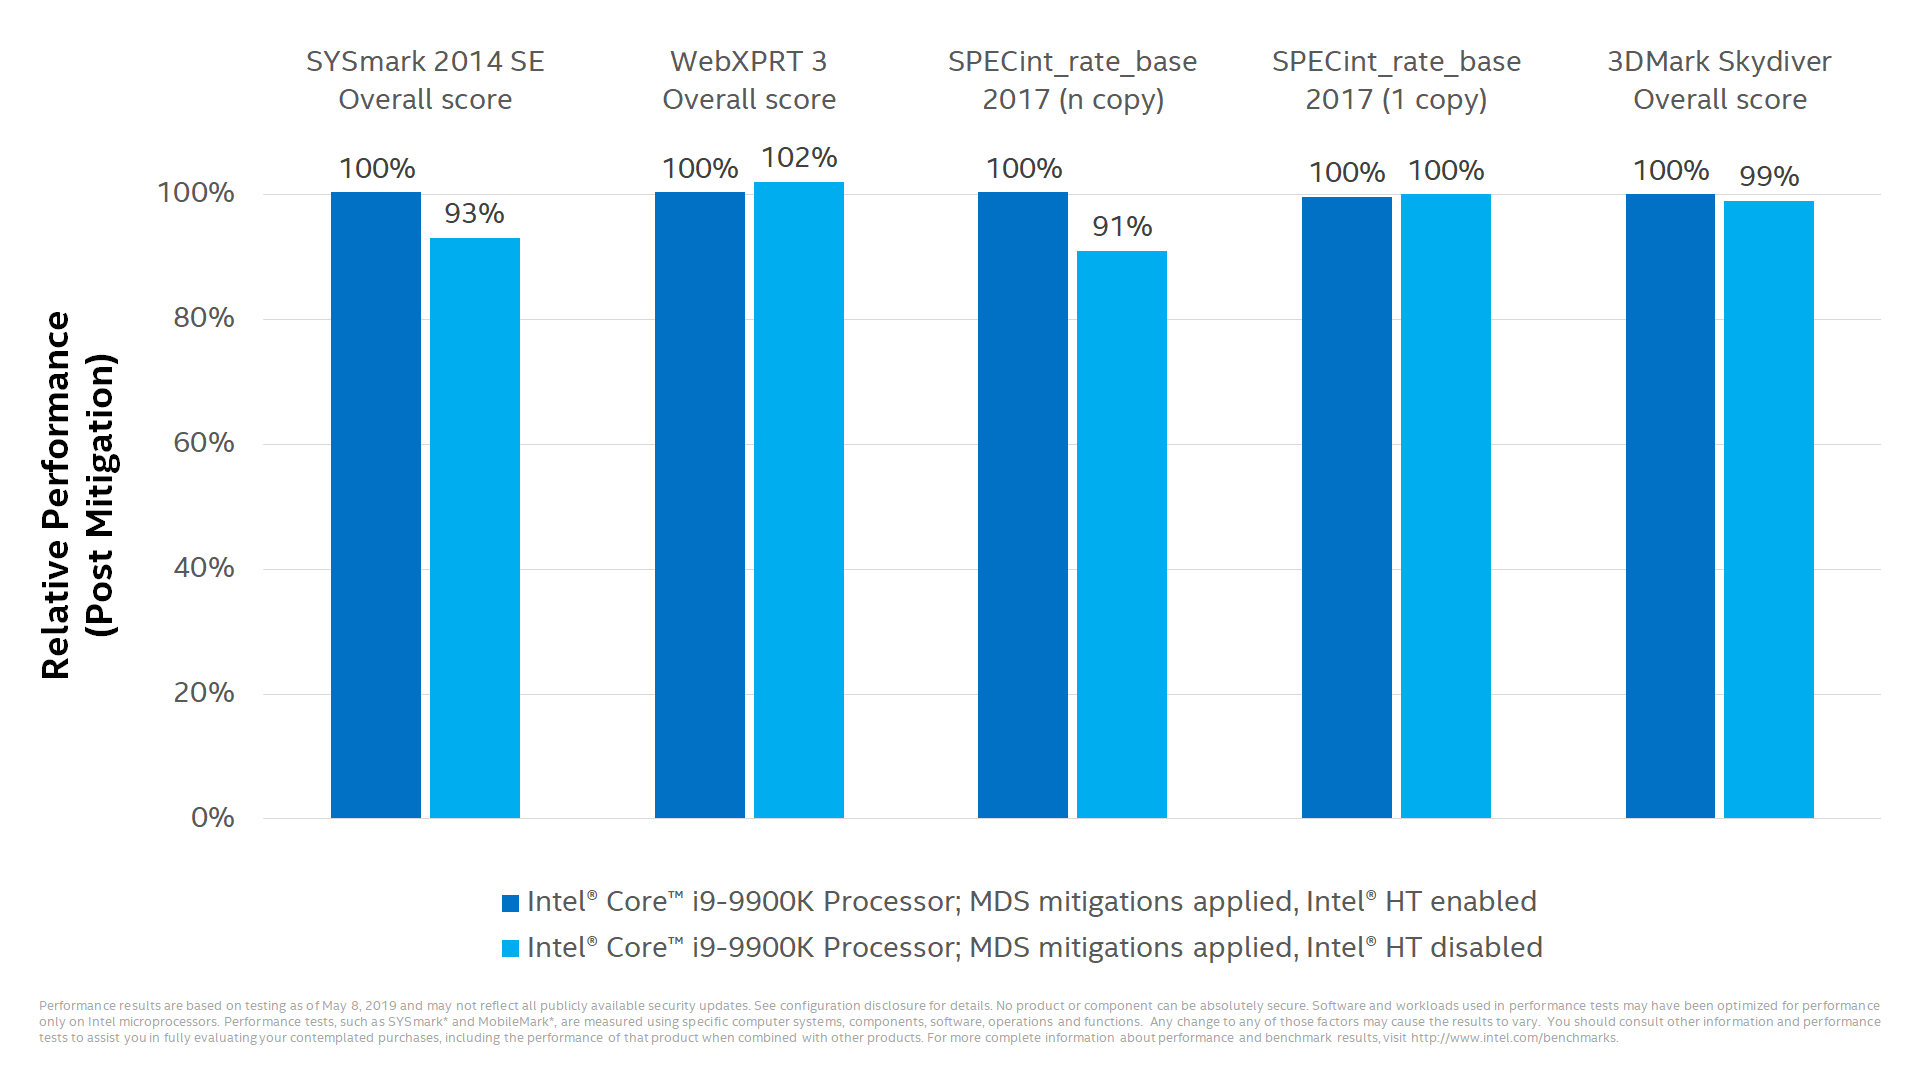 Some performance impact for the majority of PC clients with Intel® Hyper-Threading disabled